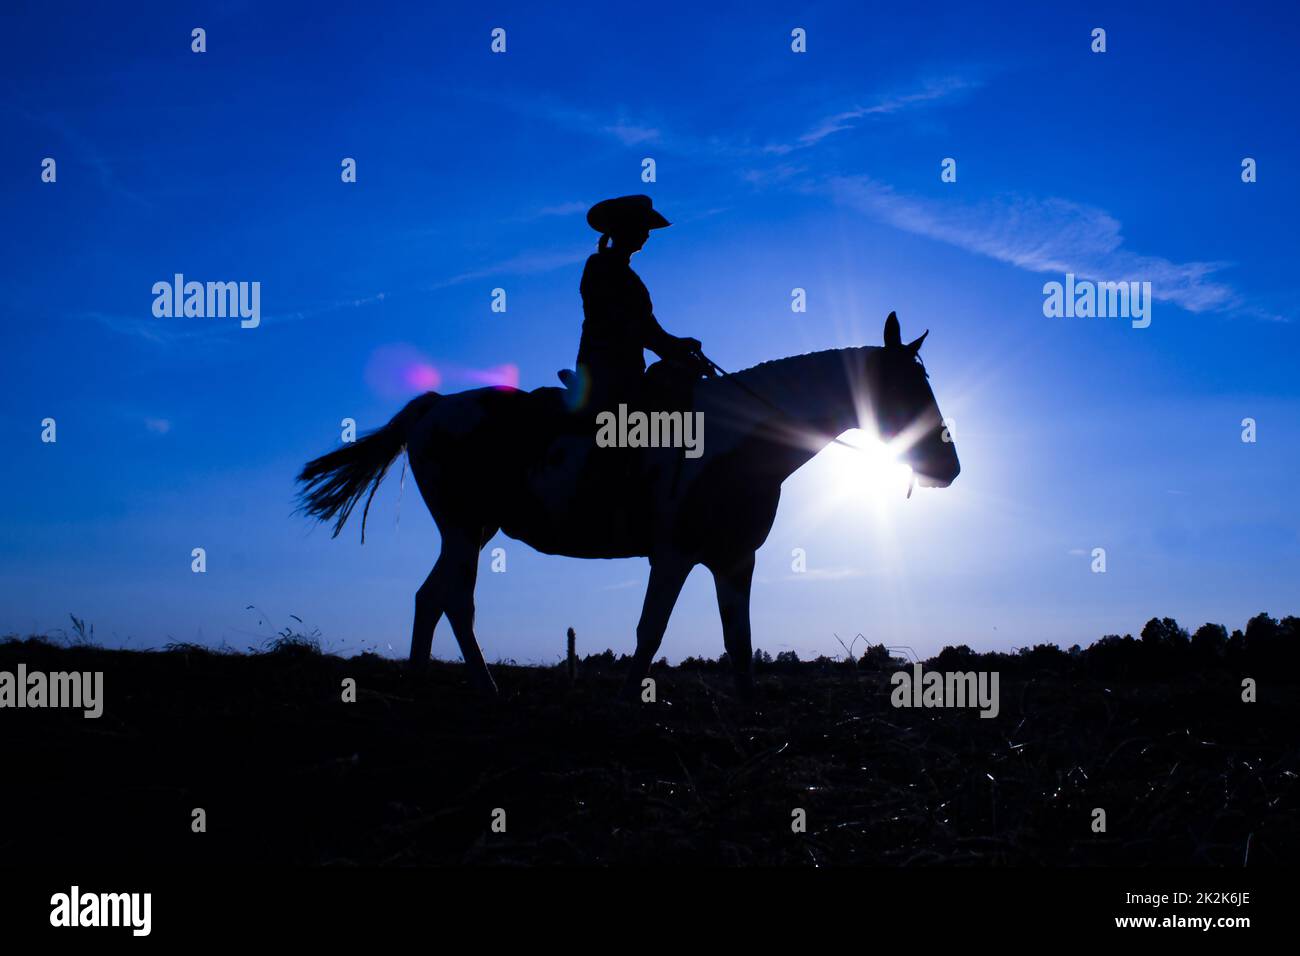 Silhouette Cowgirl on Horse at Sunset in Blue (12) Stockfoto